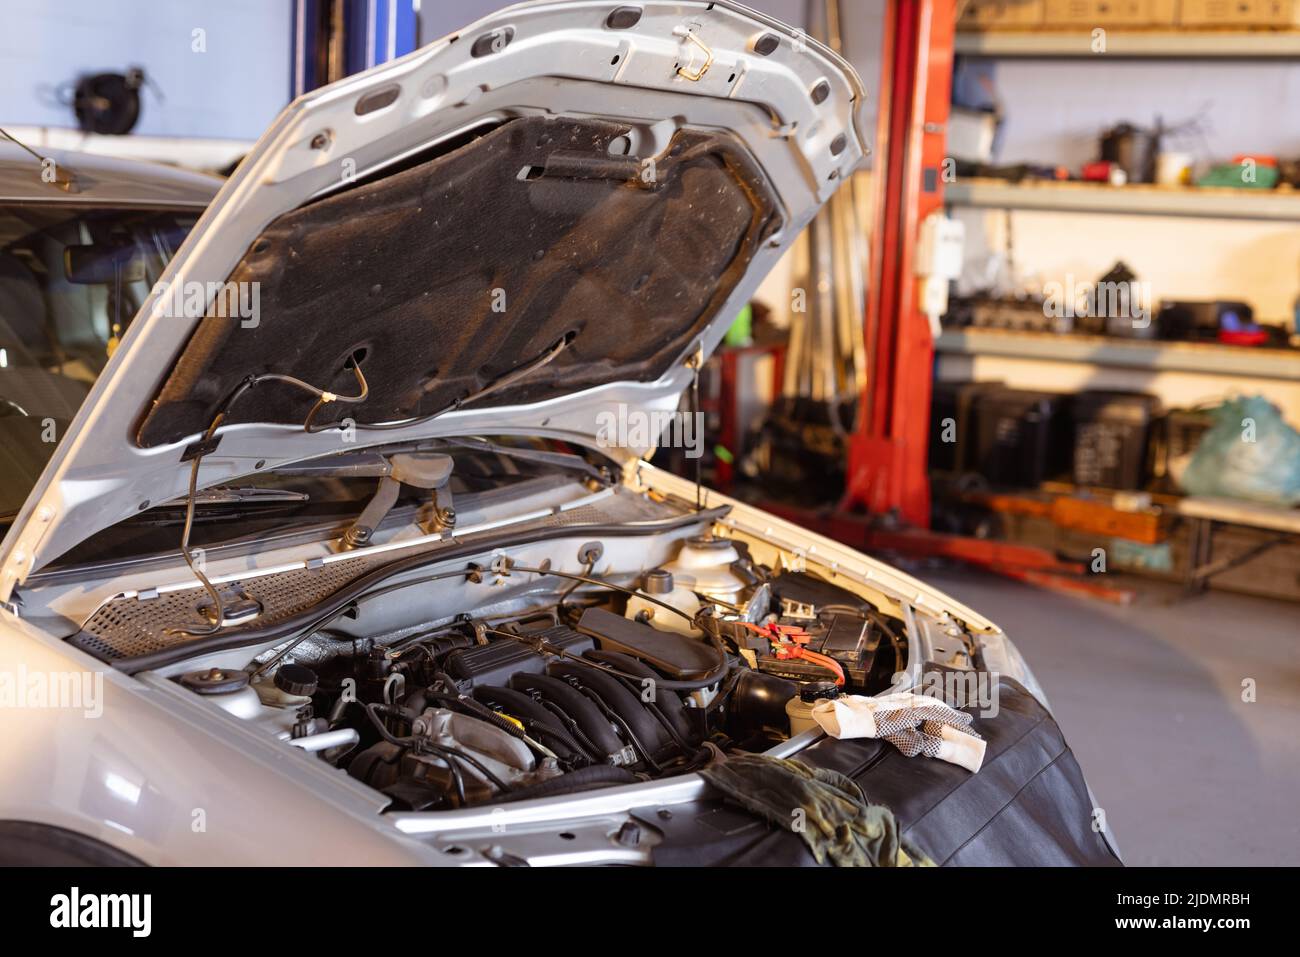 Faulty car with open bonnet in repair workshop, copy space Stock Photo